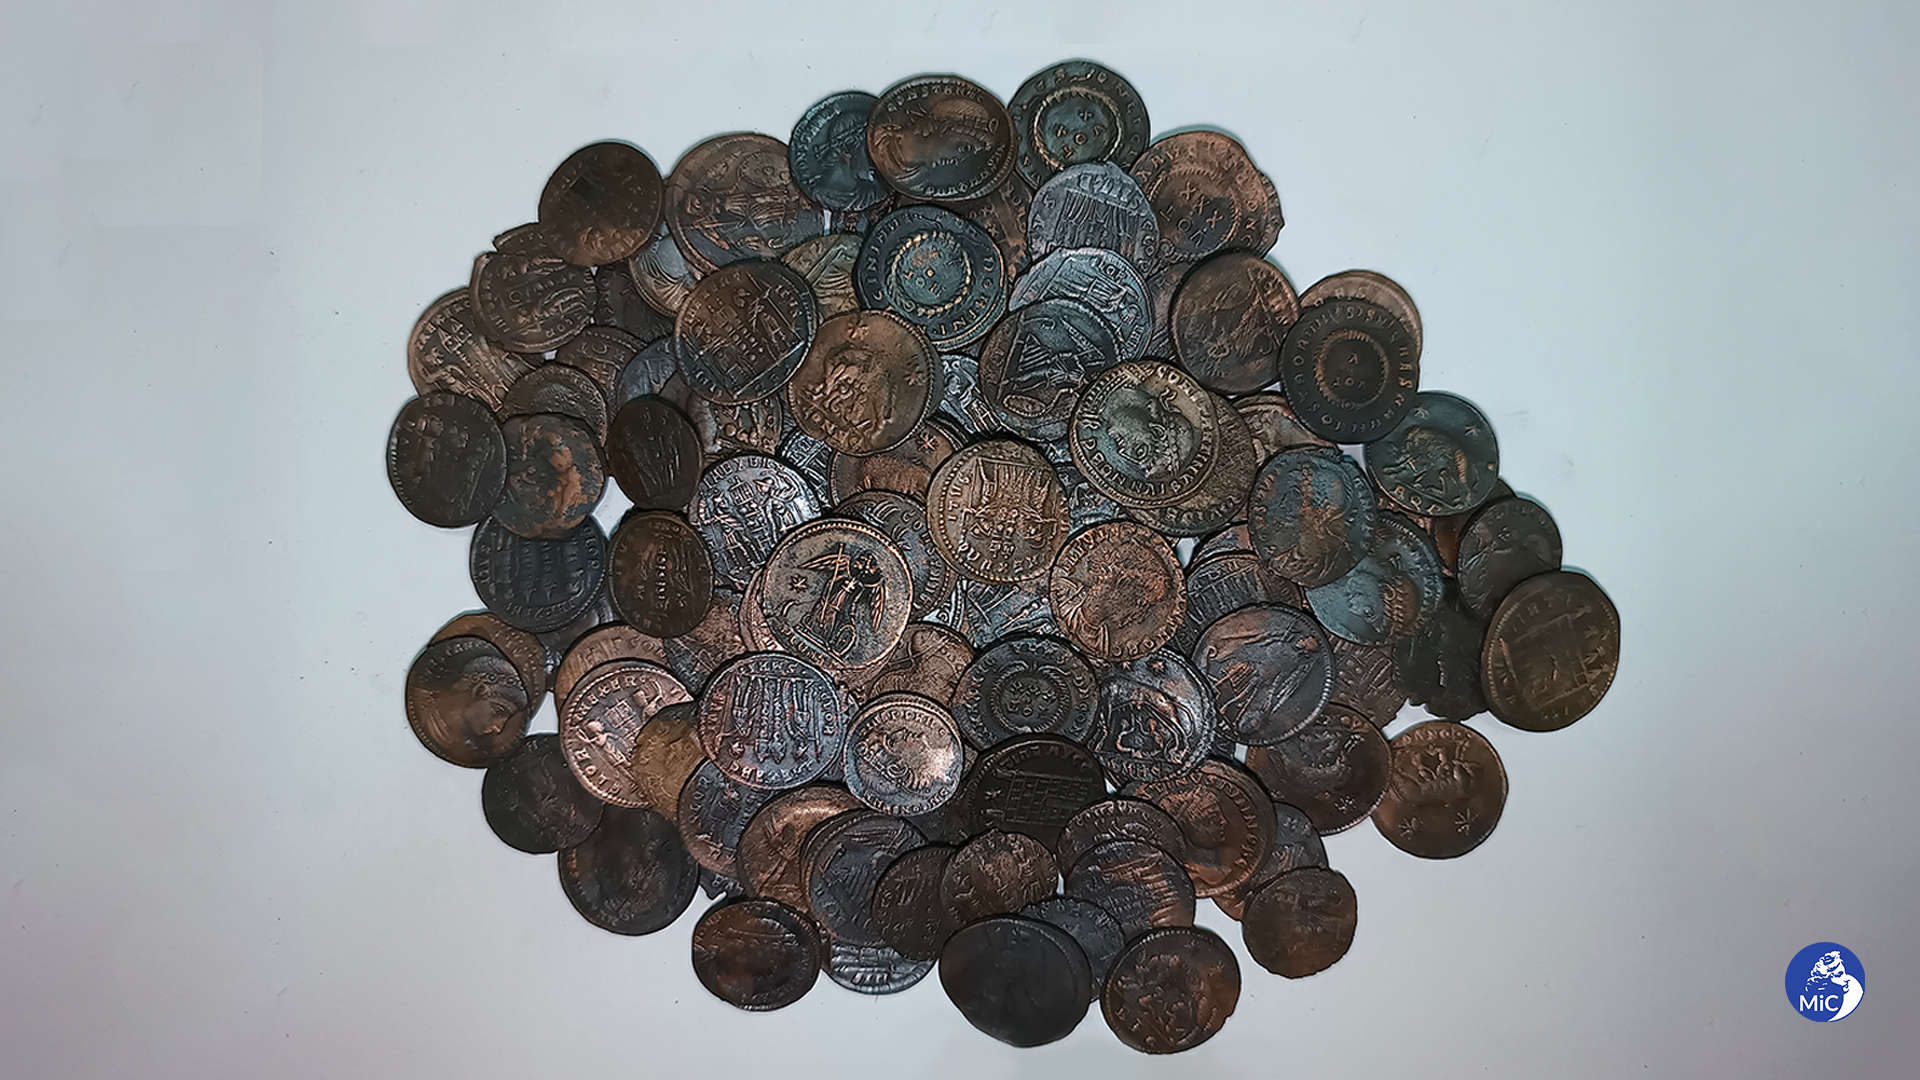 Extraordinary discovery in Sardinia: well-preserved treasure coins huge trove Roman of